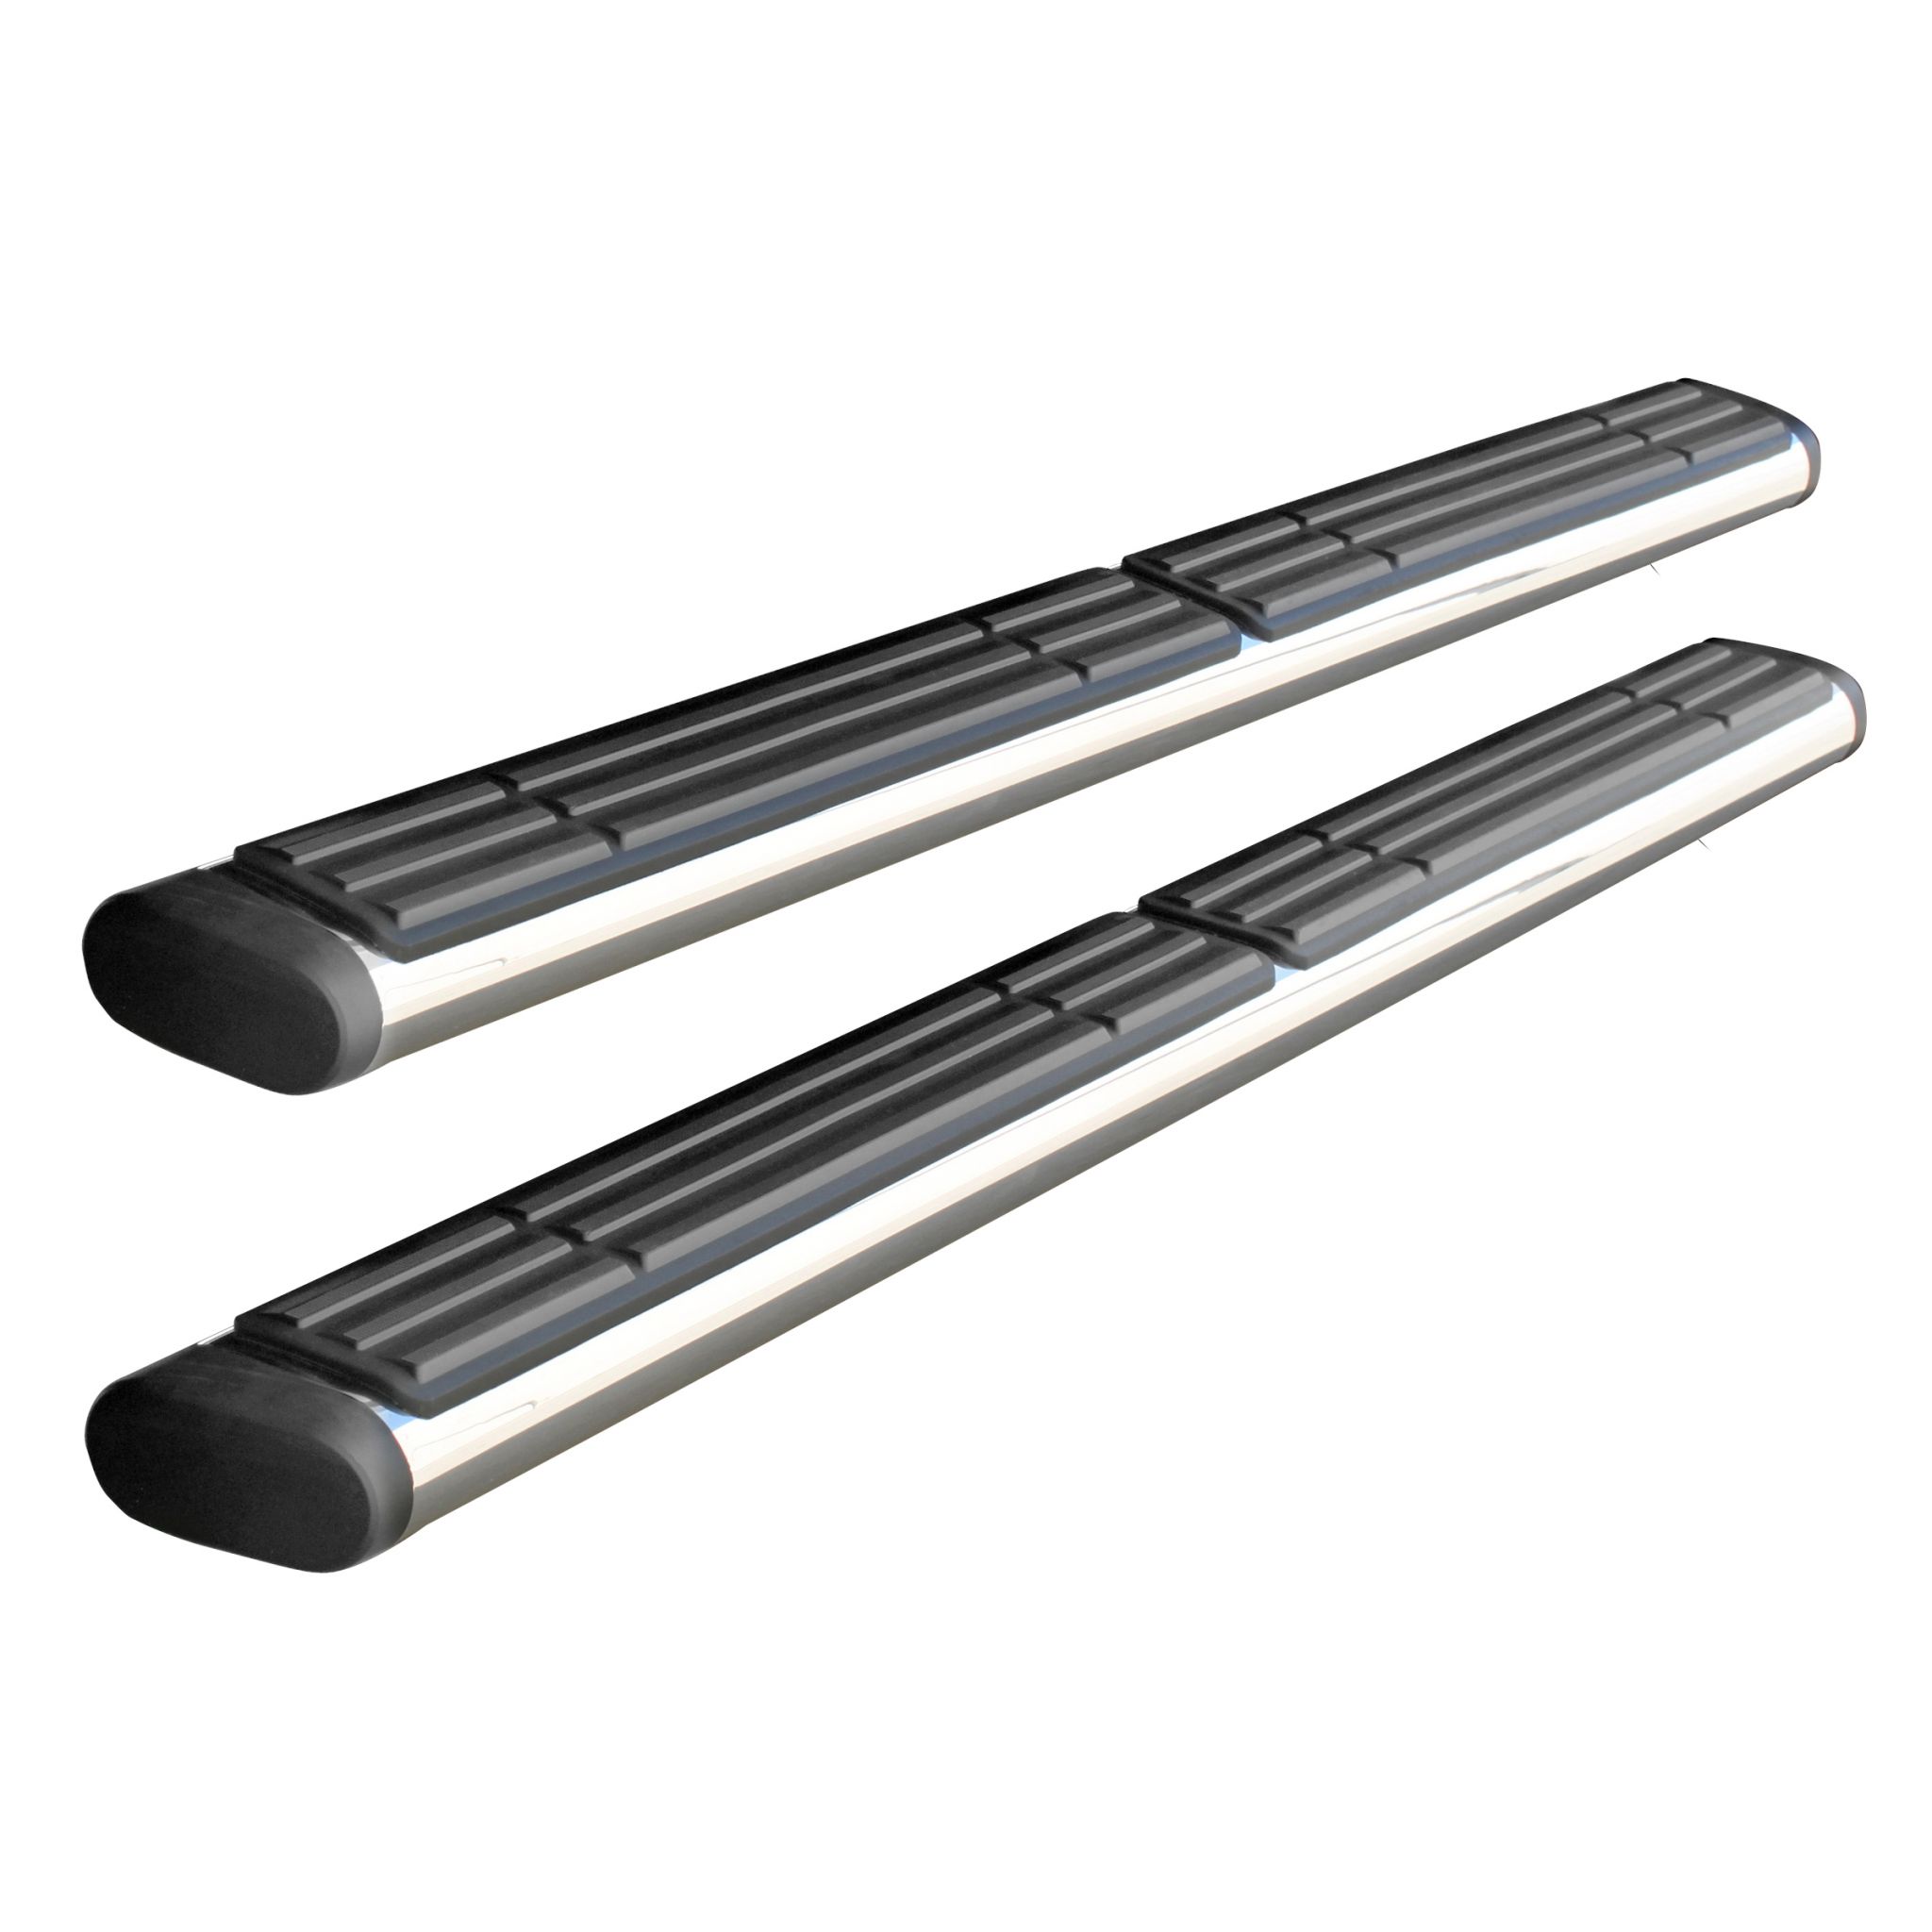 Go Rhino 660080PS - 6" OE Xtreme Series SideSteps - Boards Only - Polished Stainless Steel